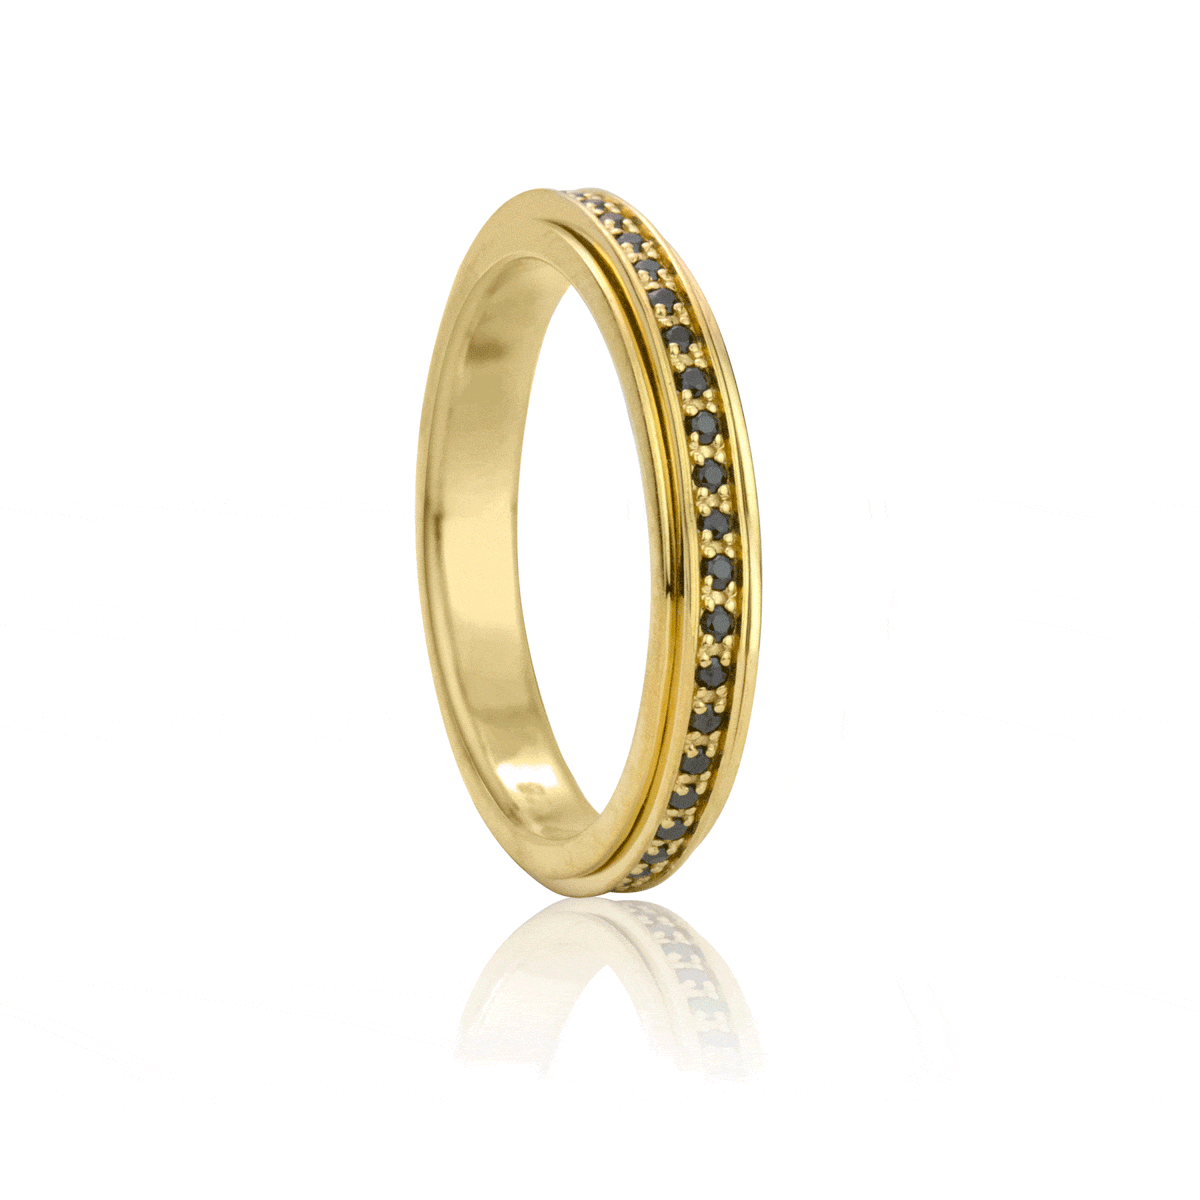 Meditation Rings Meditation Rings Eclipse Yellow Gold Vermeil